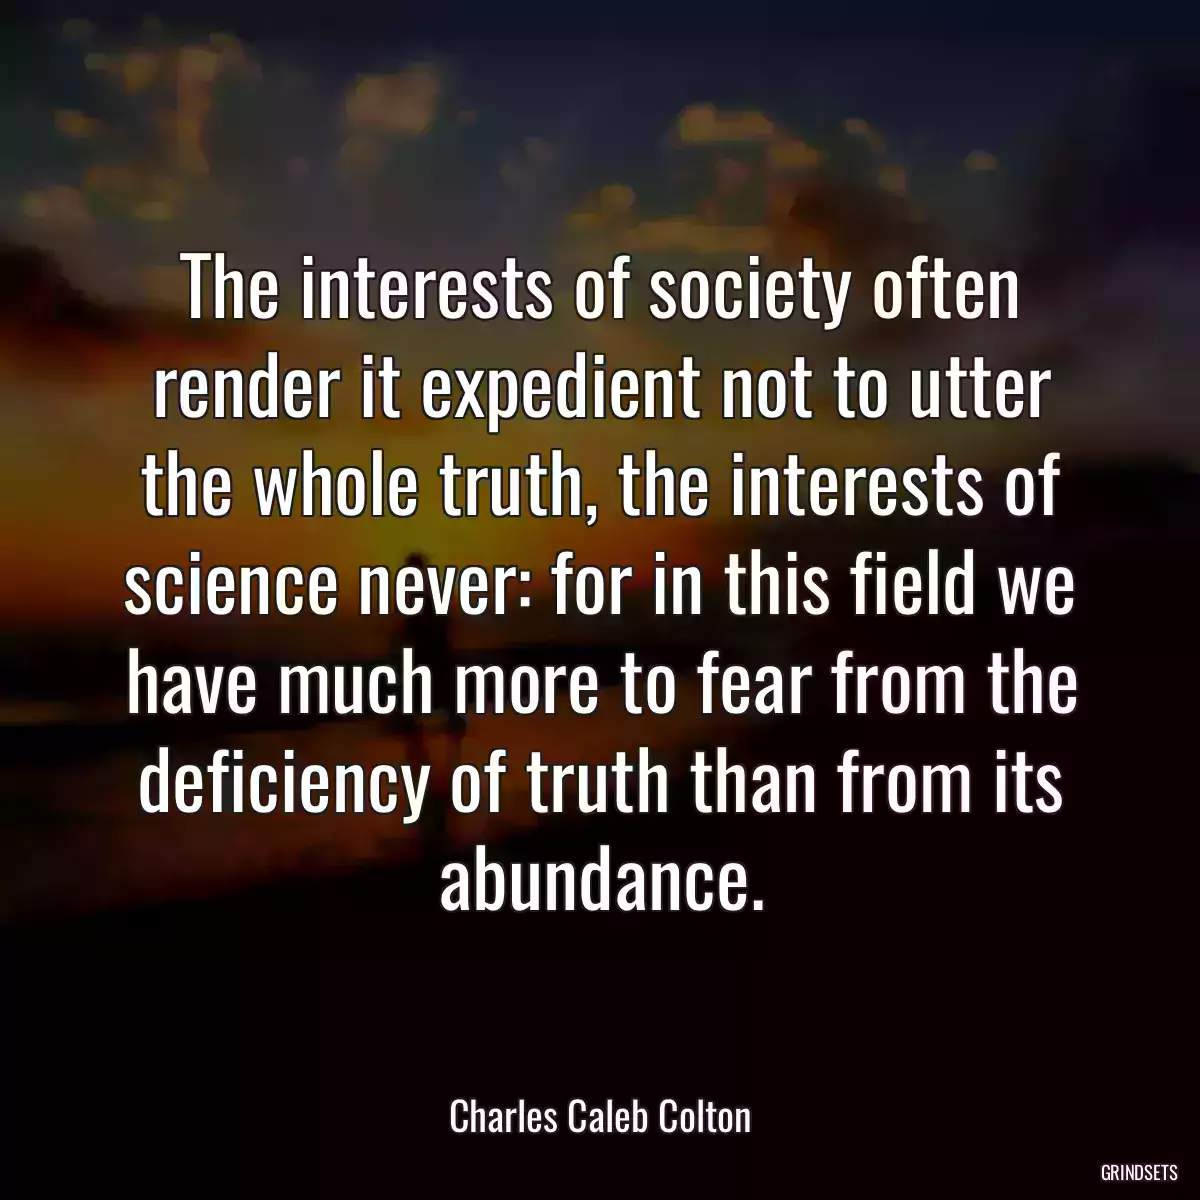 The interests of society often render it expedient not to utter the whole truth, the interests of science never: for in this field we have much more to fear from the deficiency of truth than from its abundance.